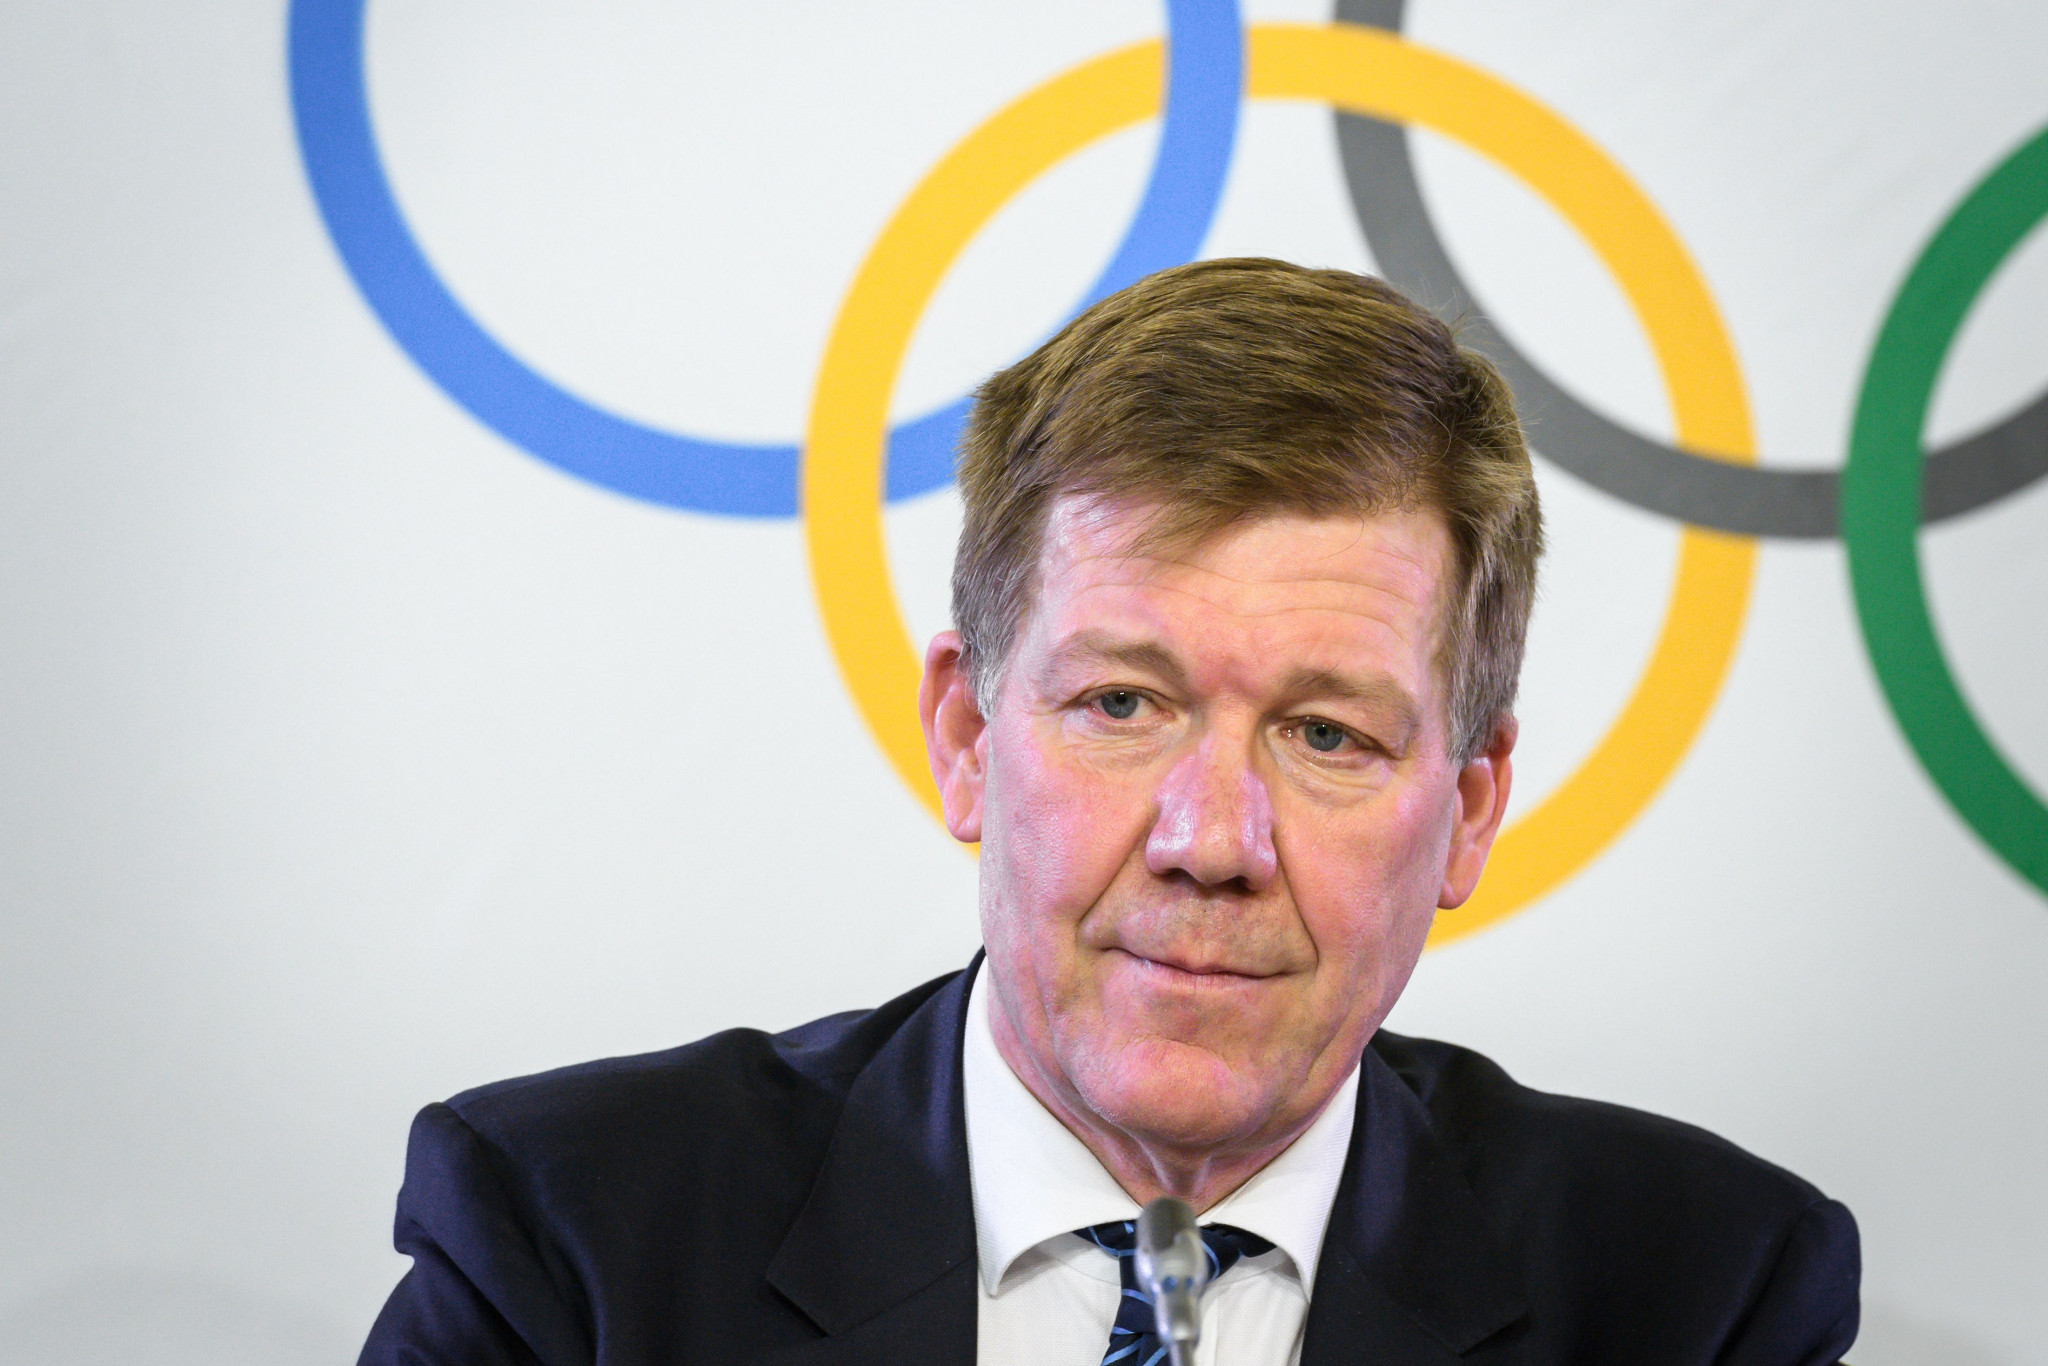 IOC hopeful of new tests to allow longer detection-window revealing doping in endurance sports